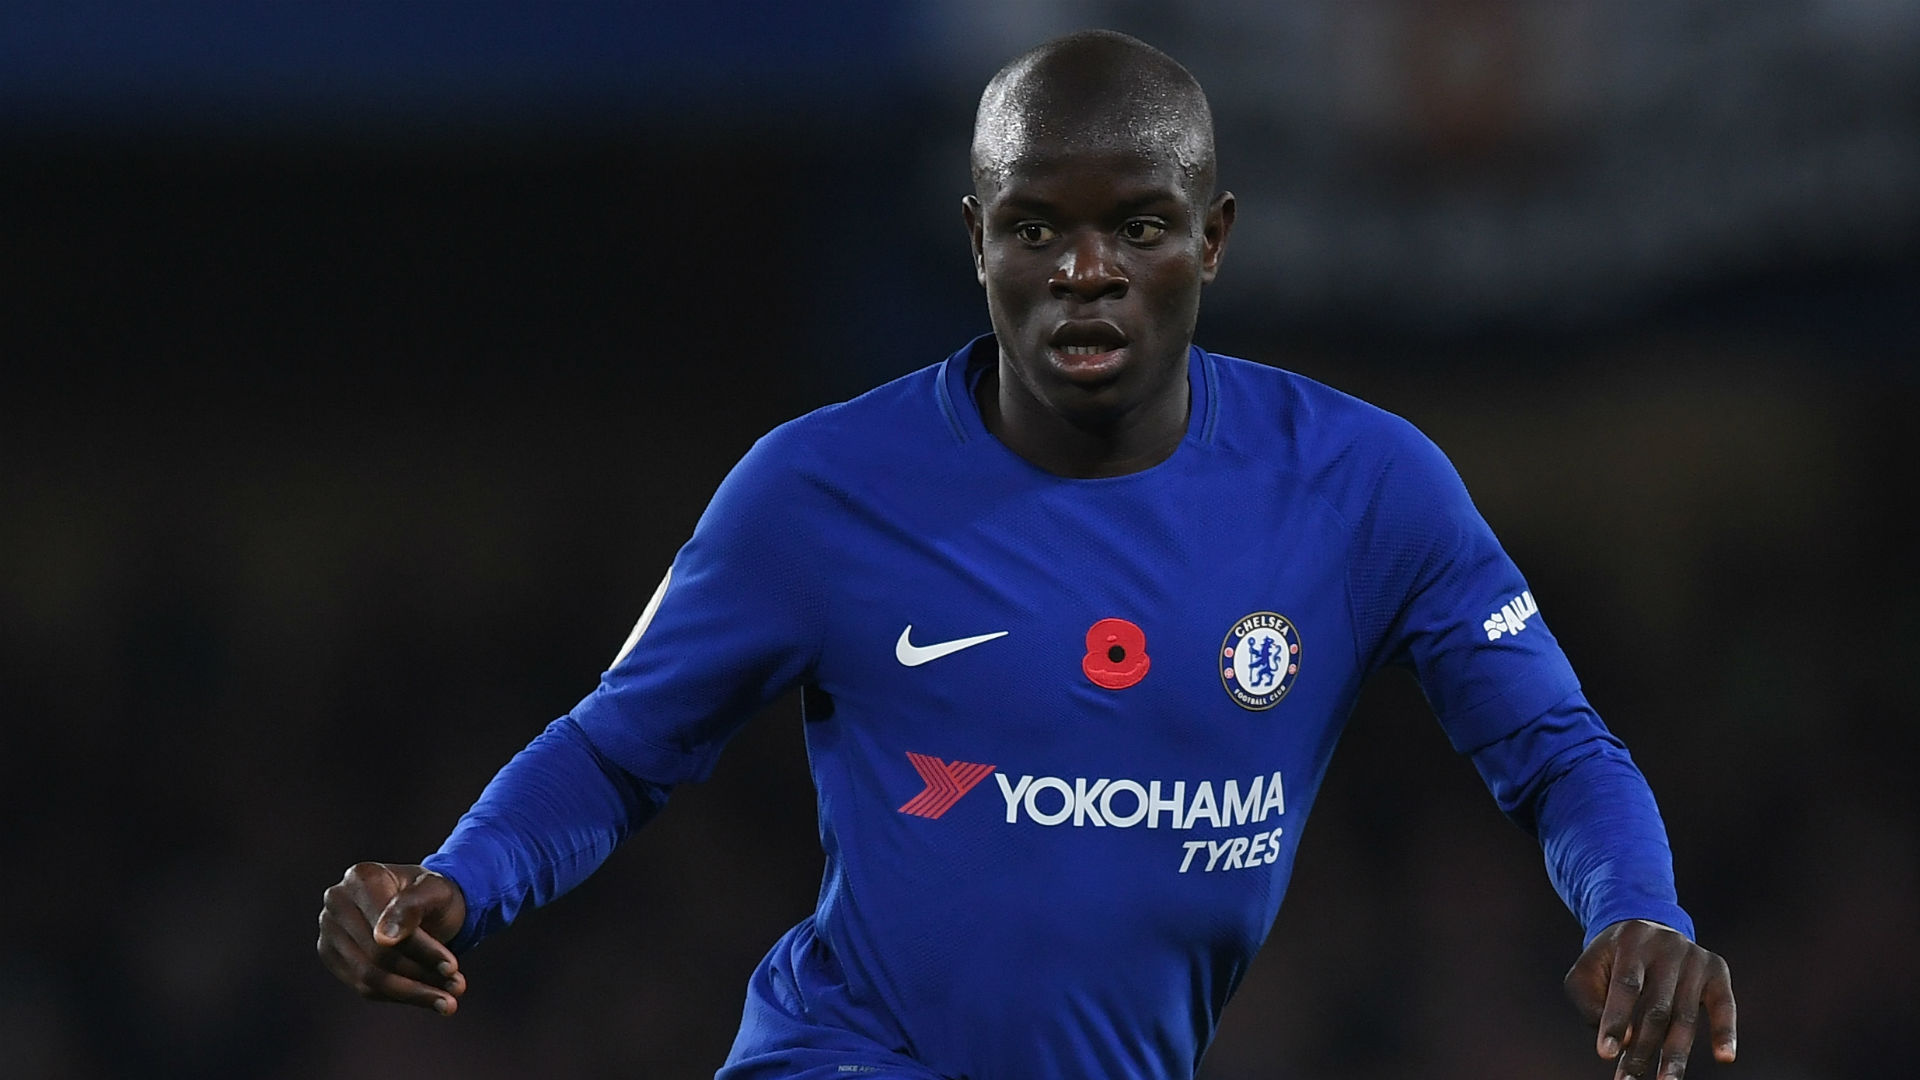 Kante Fine After Collapse At Training